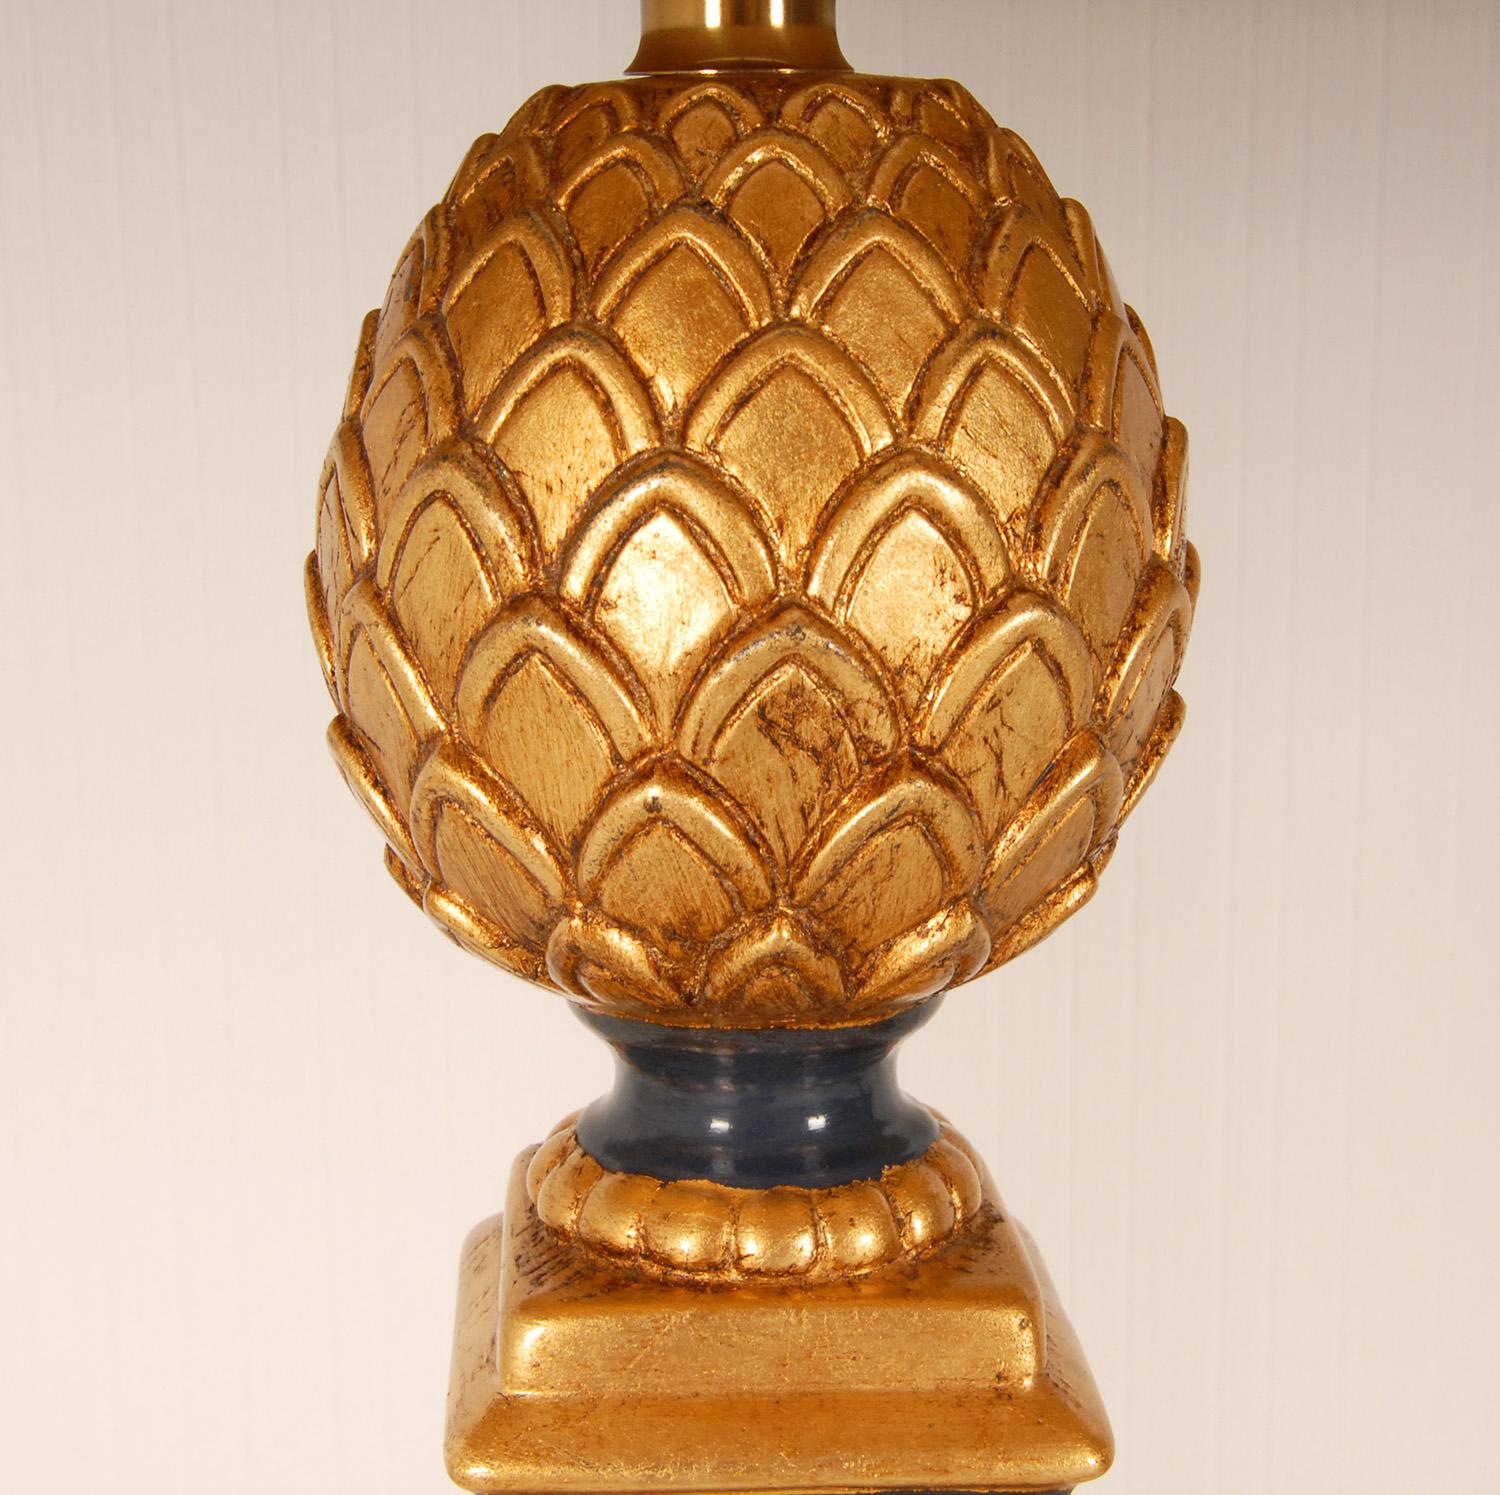 Vintage French High End Lamps Blue Gold Giltwood Pineapple Table Lamps, a Pair In Good Condition For Sale In Wommelgem, VAN